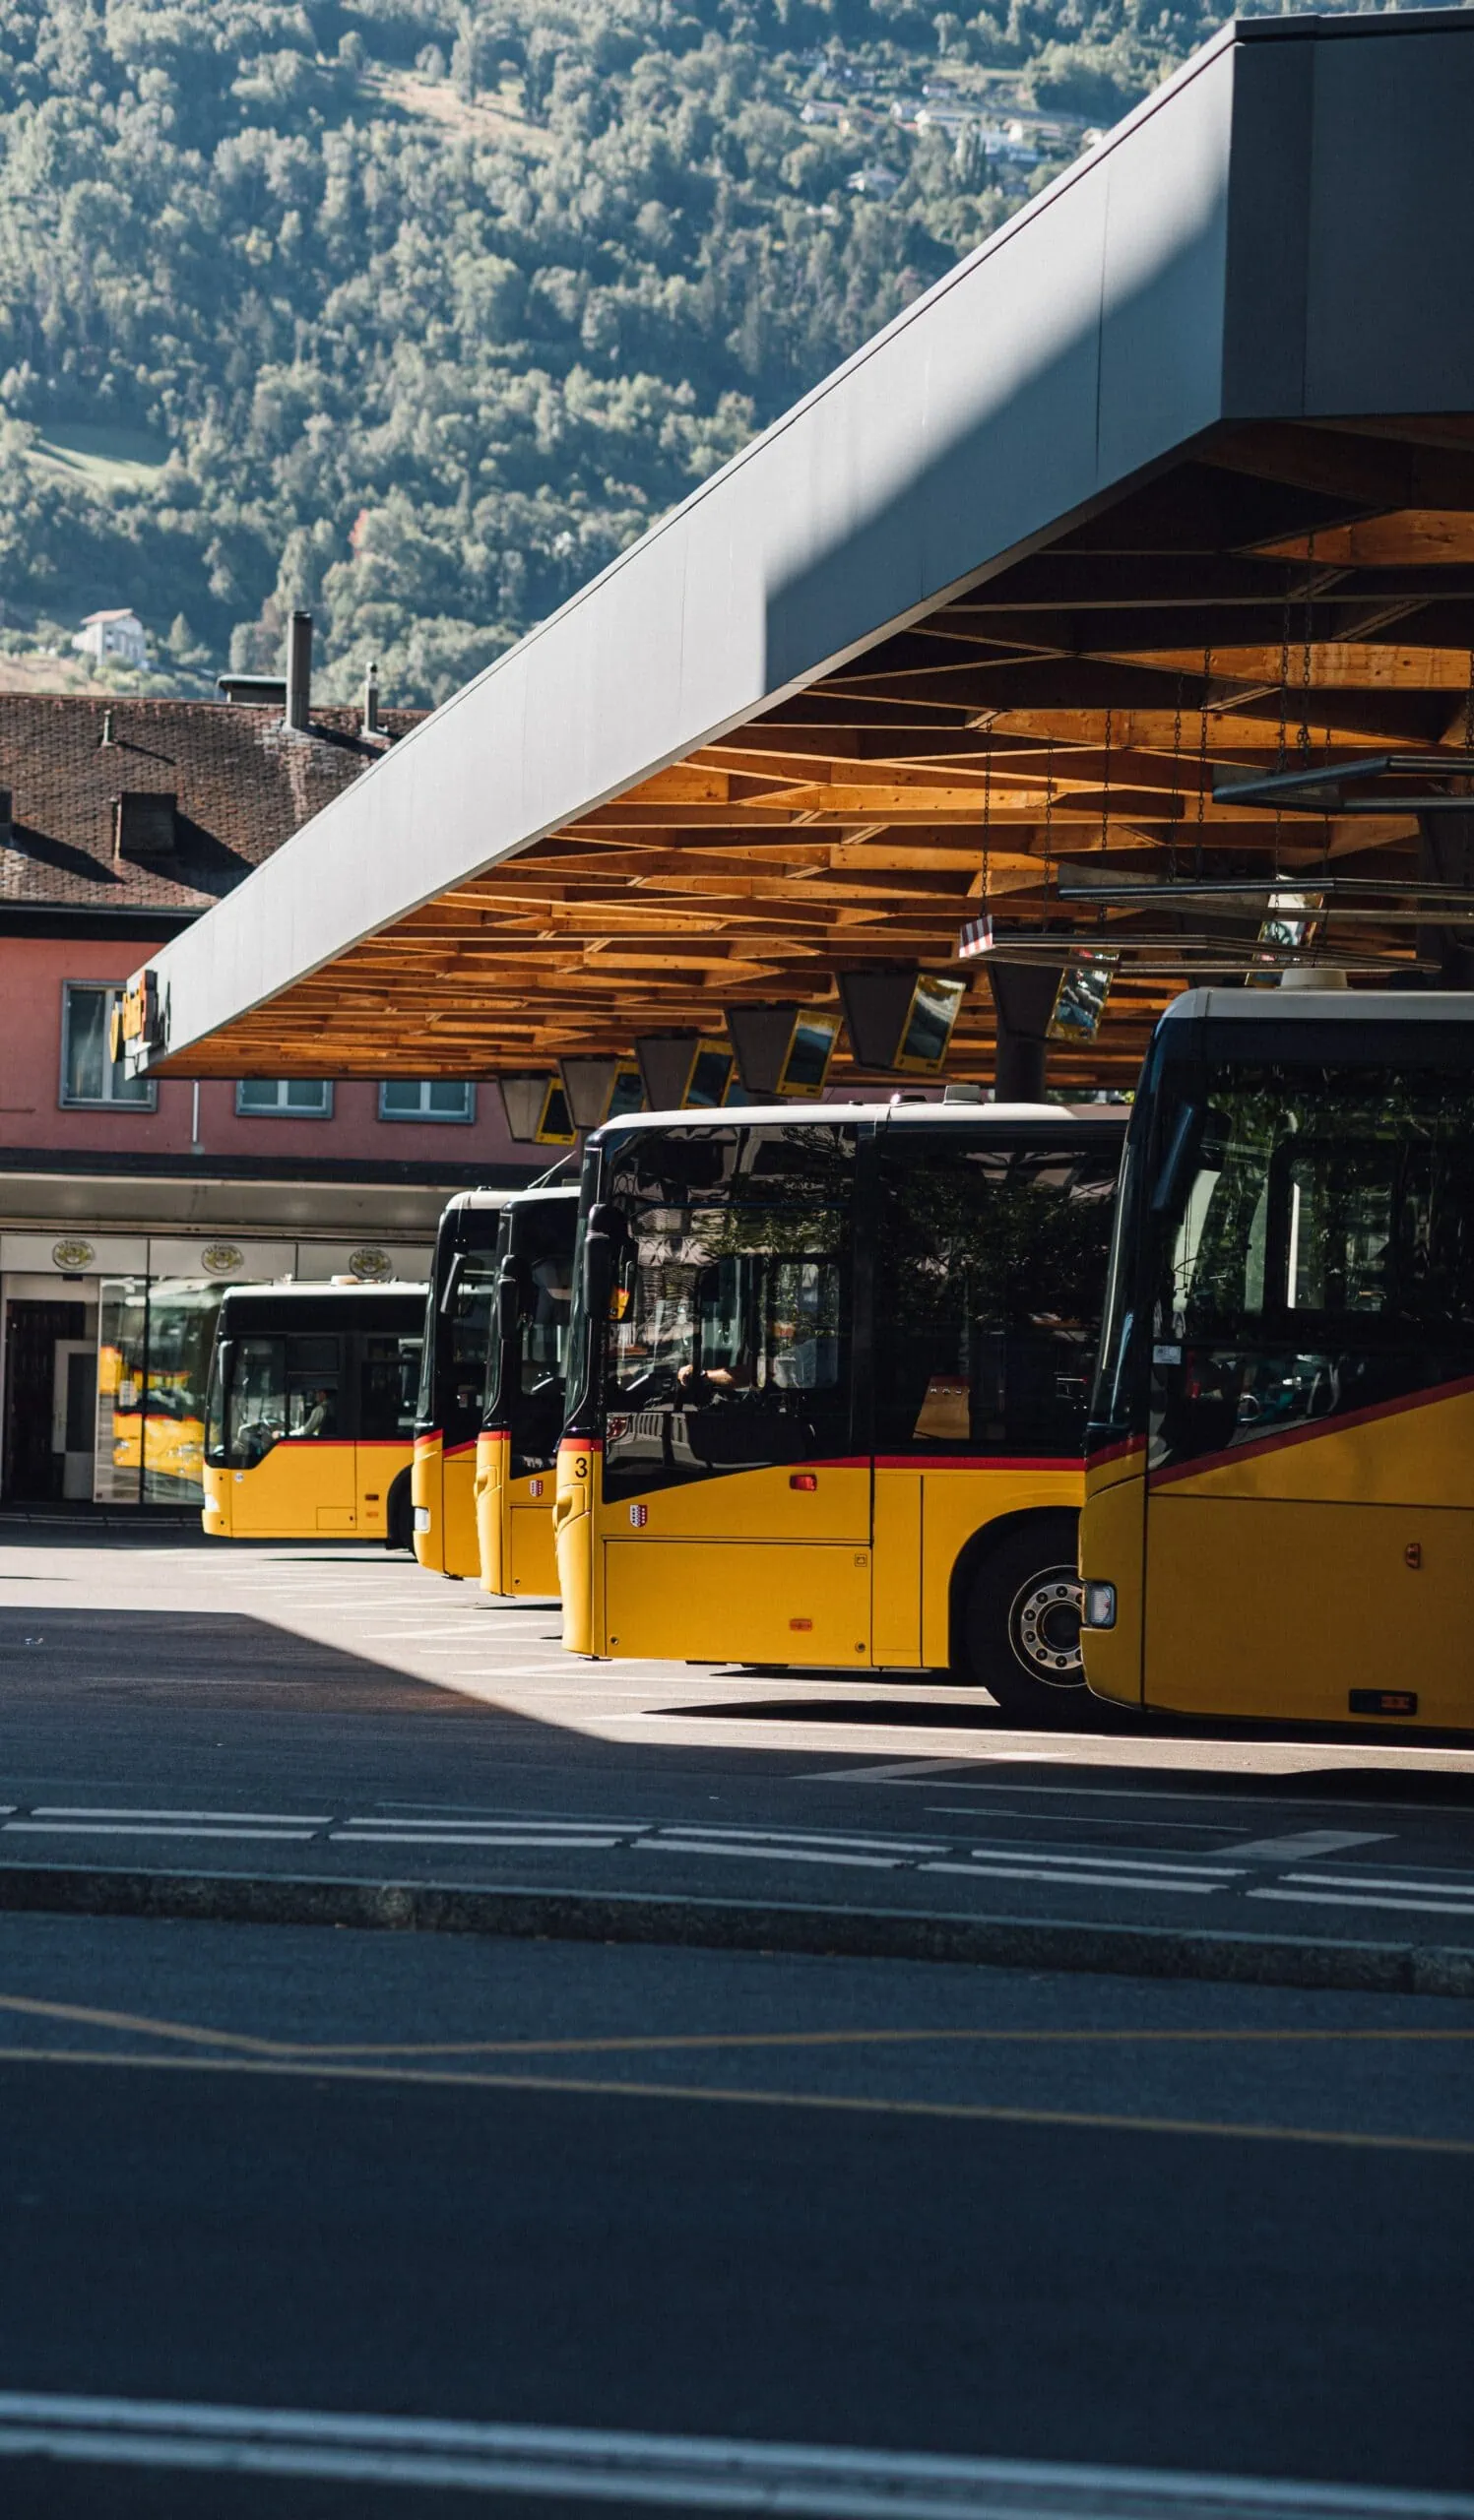 Buses in parking lot for a company that employs bus GPS trackers